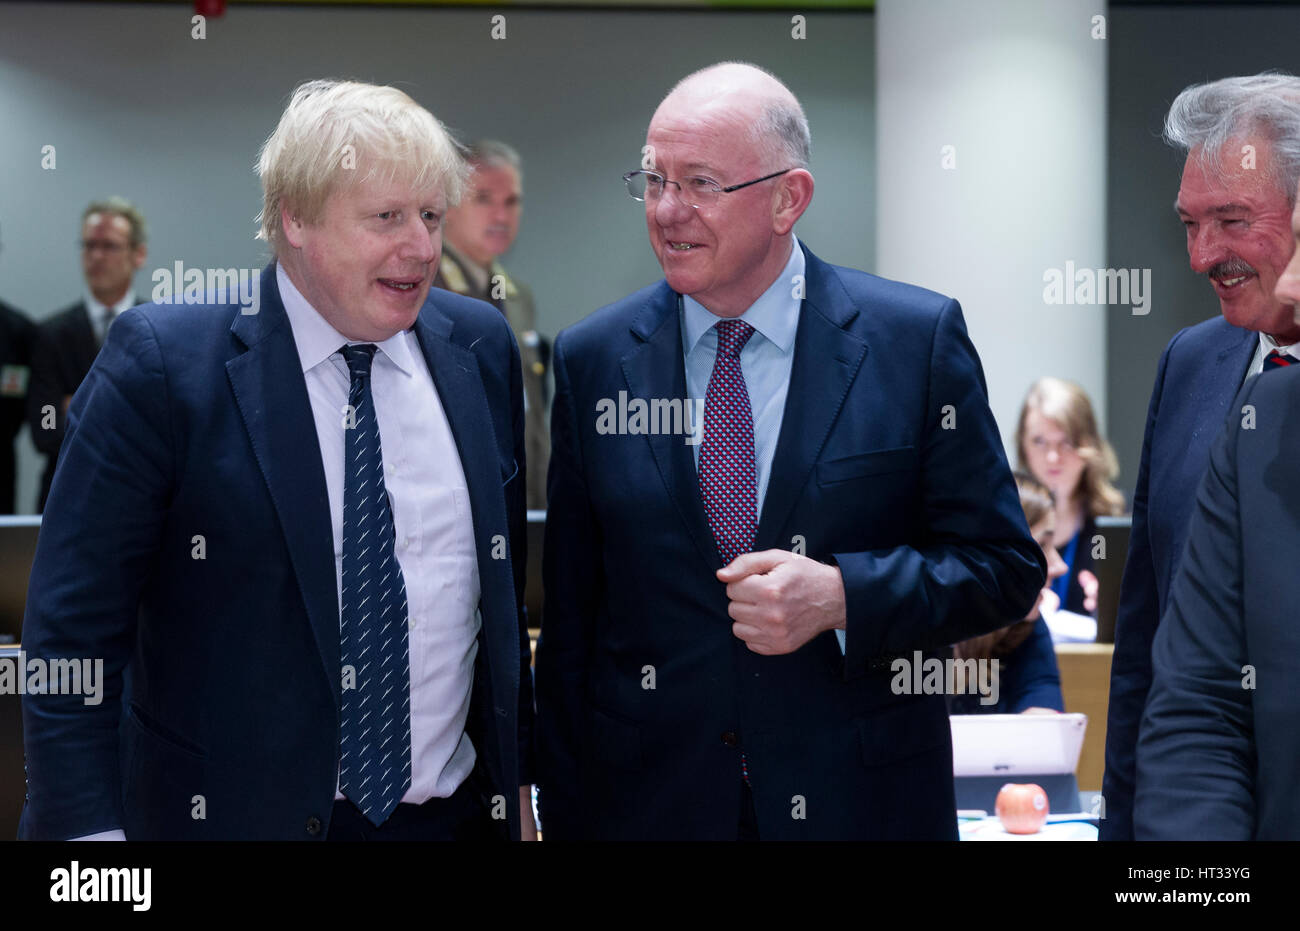 March 6, 2017 - Brussels, Belgium: British Secretary of State for Foreign & Commonwealth Affairs Boris Johnson (L) is talking with the Irish Minister for Foreign Affairs & Trade Charles Flanagan (R) during an EU Defense and foreign affairs Ministers meeting in the Europa building, the EU Council headquarter. - NO WIRE SERVICE- Photo: Thierry Monasse/dpa Photo: Thierry Monasse/dpa Stock Photo